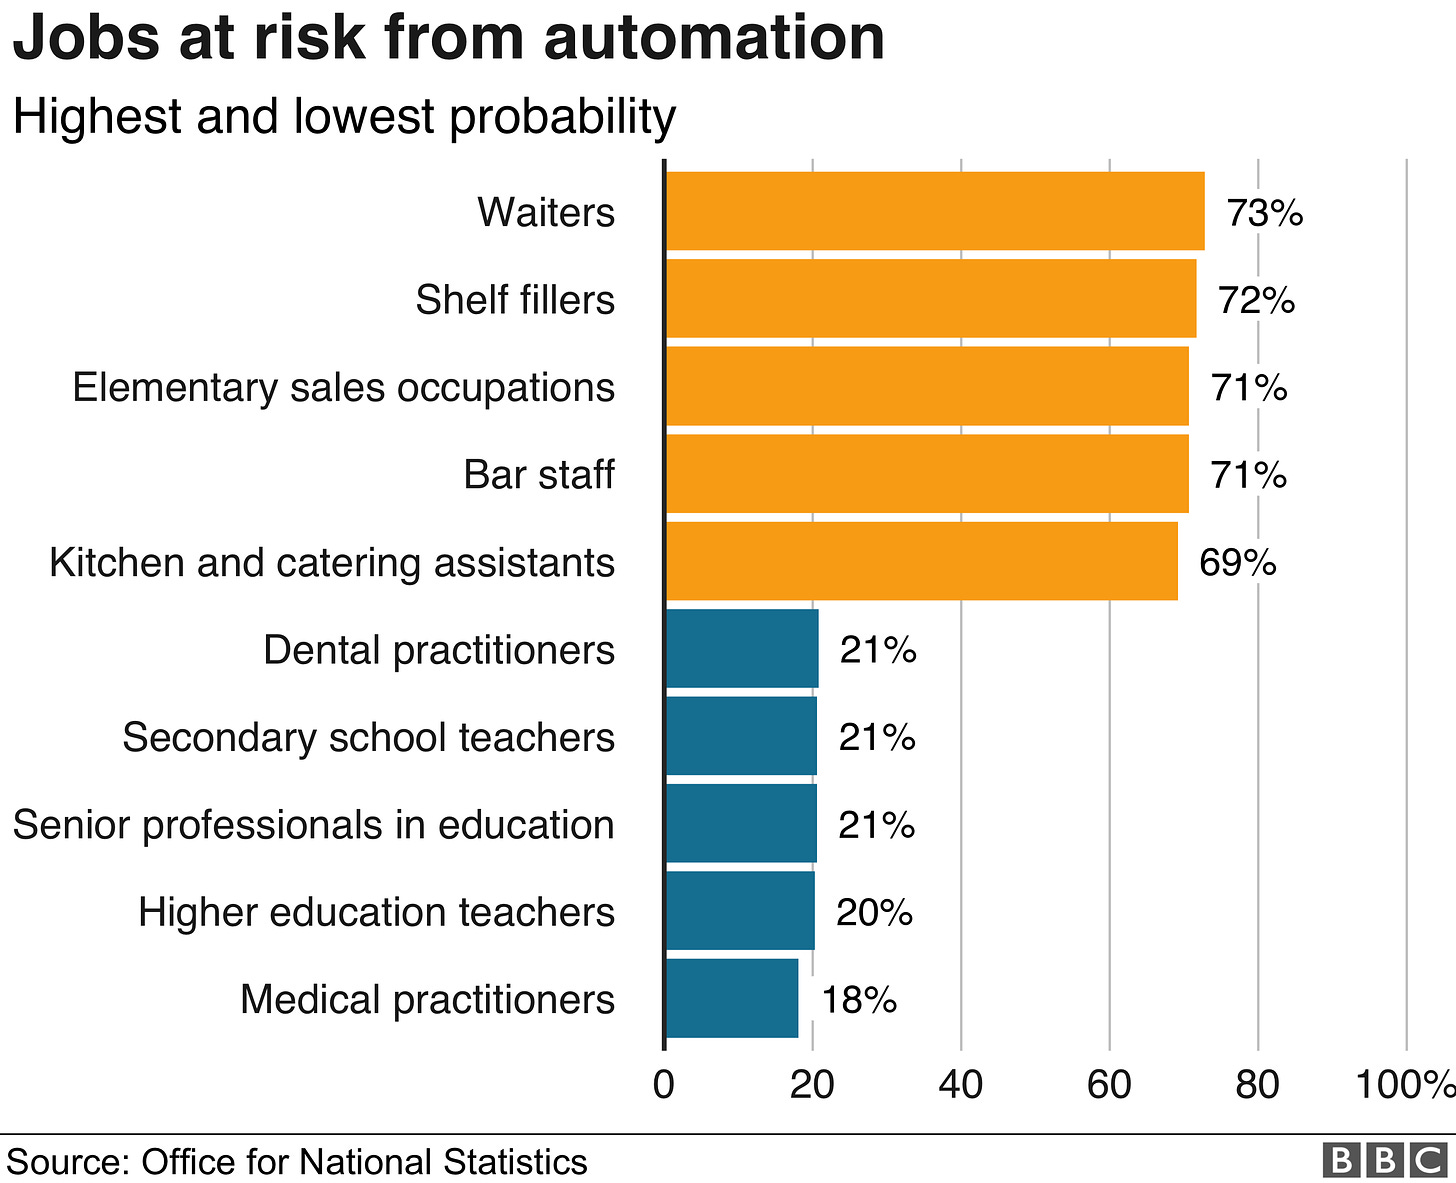 Automation could replace 1.5 million jobs, says ONS - BBC News